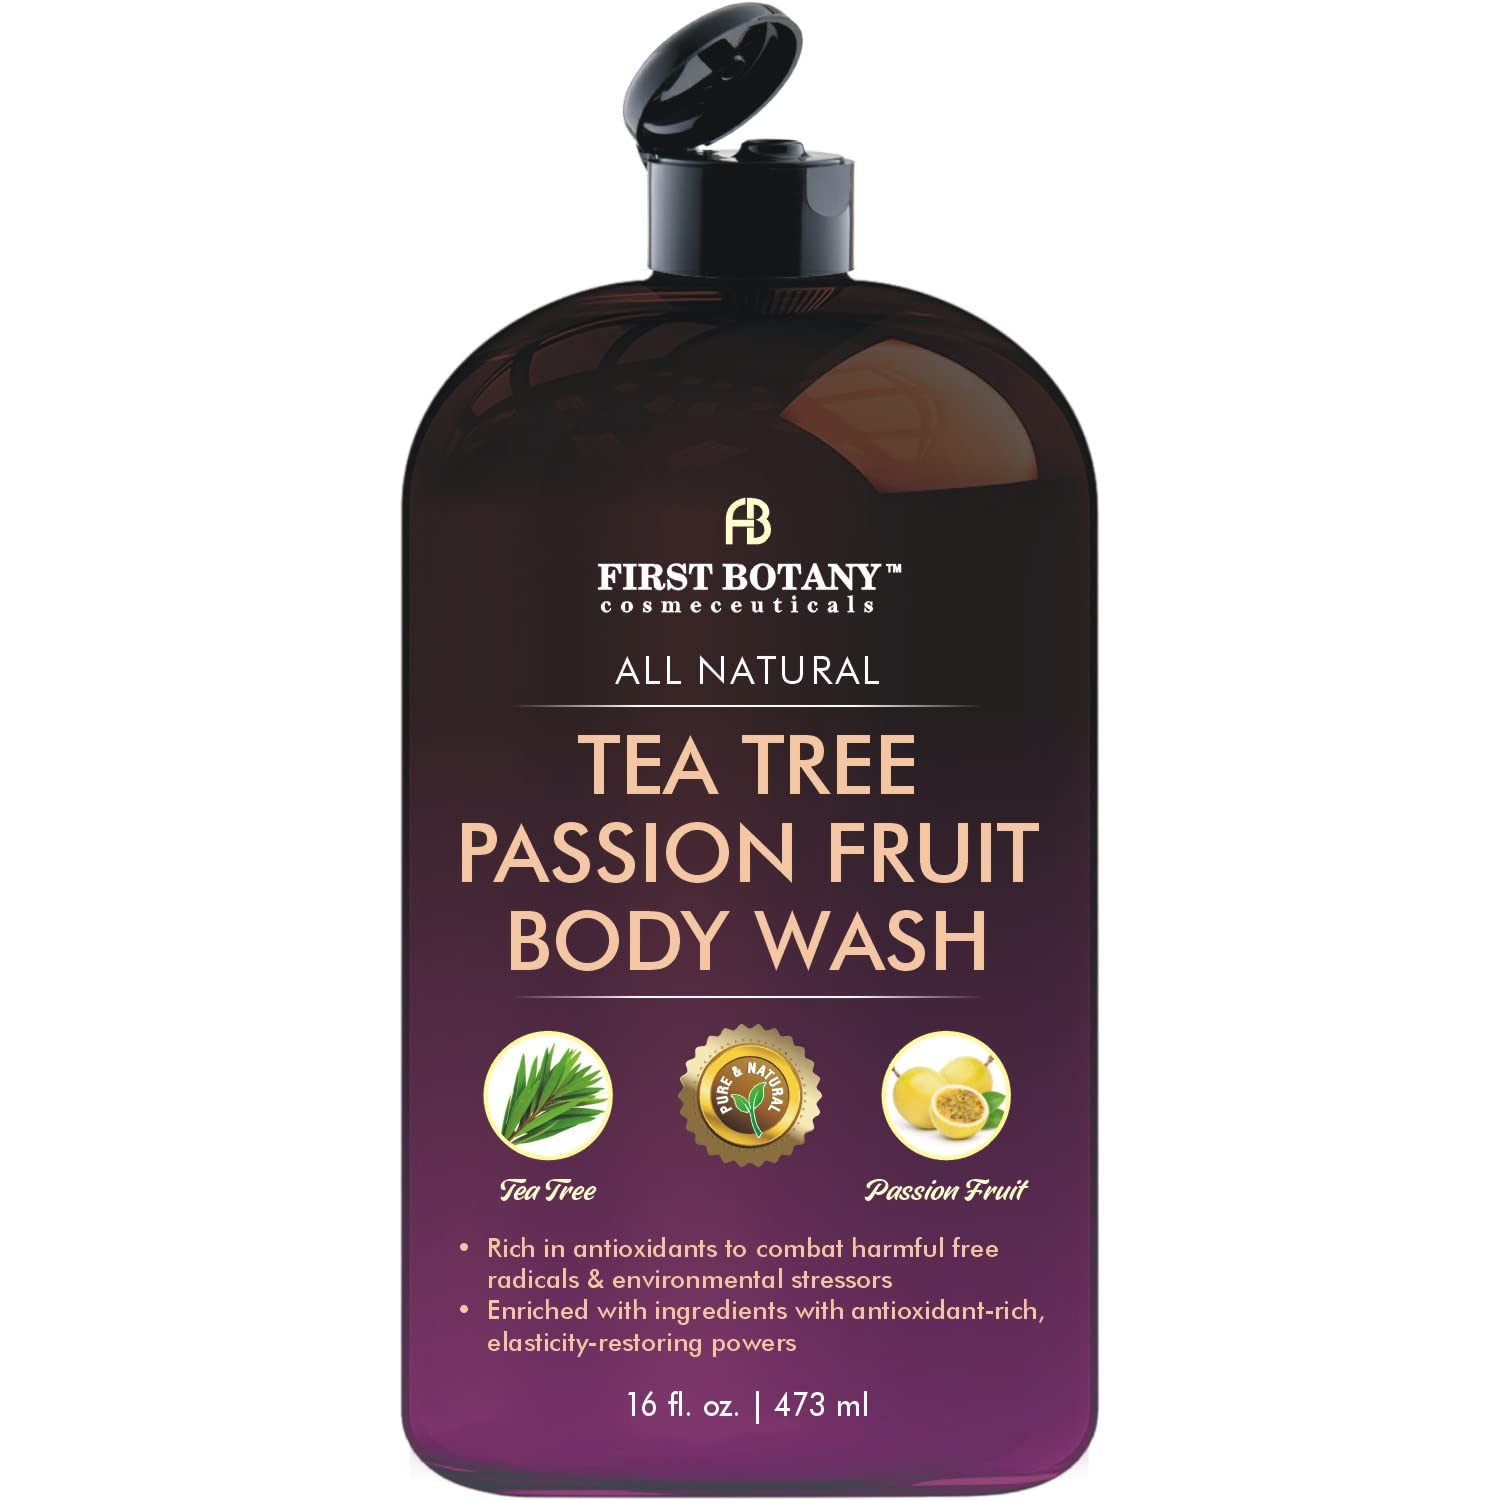 Natural Tea Tree Body Wash - A Passion Fruit Skin Cleanser - Fights Body Odor, Athlete’s Foot, Jock Itch, Nail Issues, Dandruff, Acne, Eczema, Shower Gel for Women & Men,16 fl oz